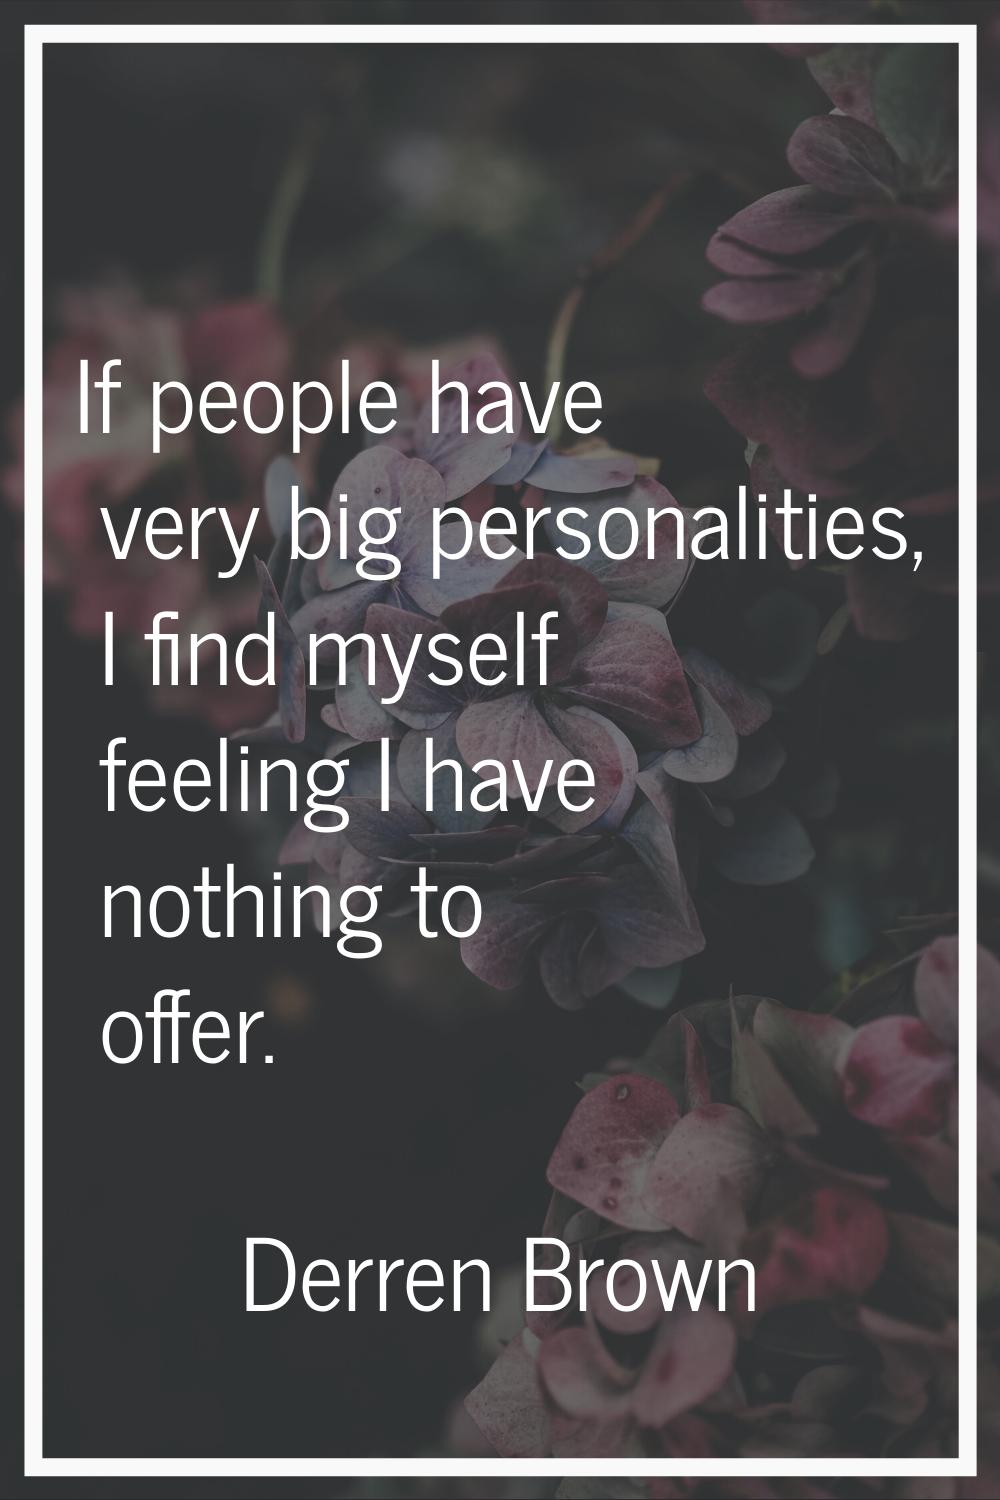 If people have very big personalities, I find myself feeling I have nothing to offer.